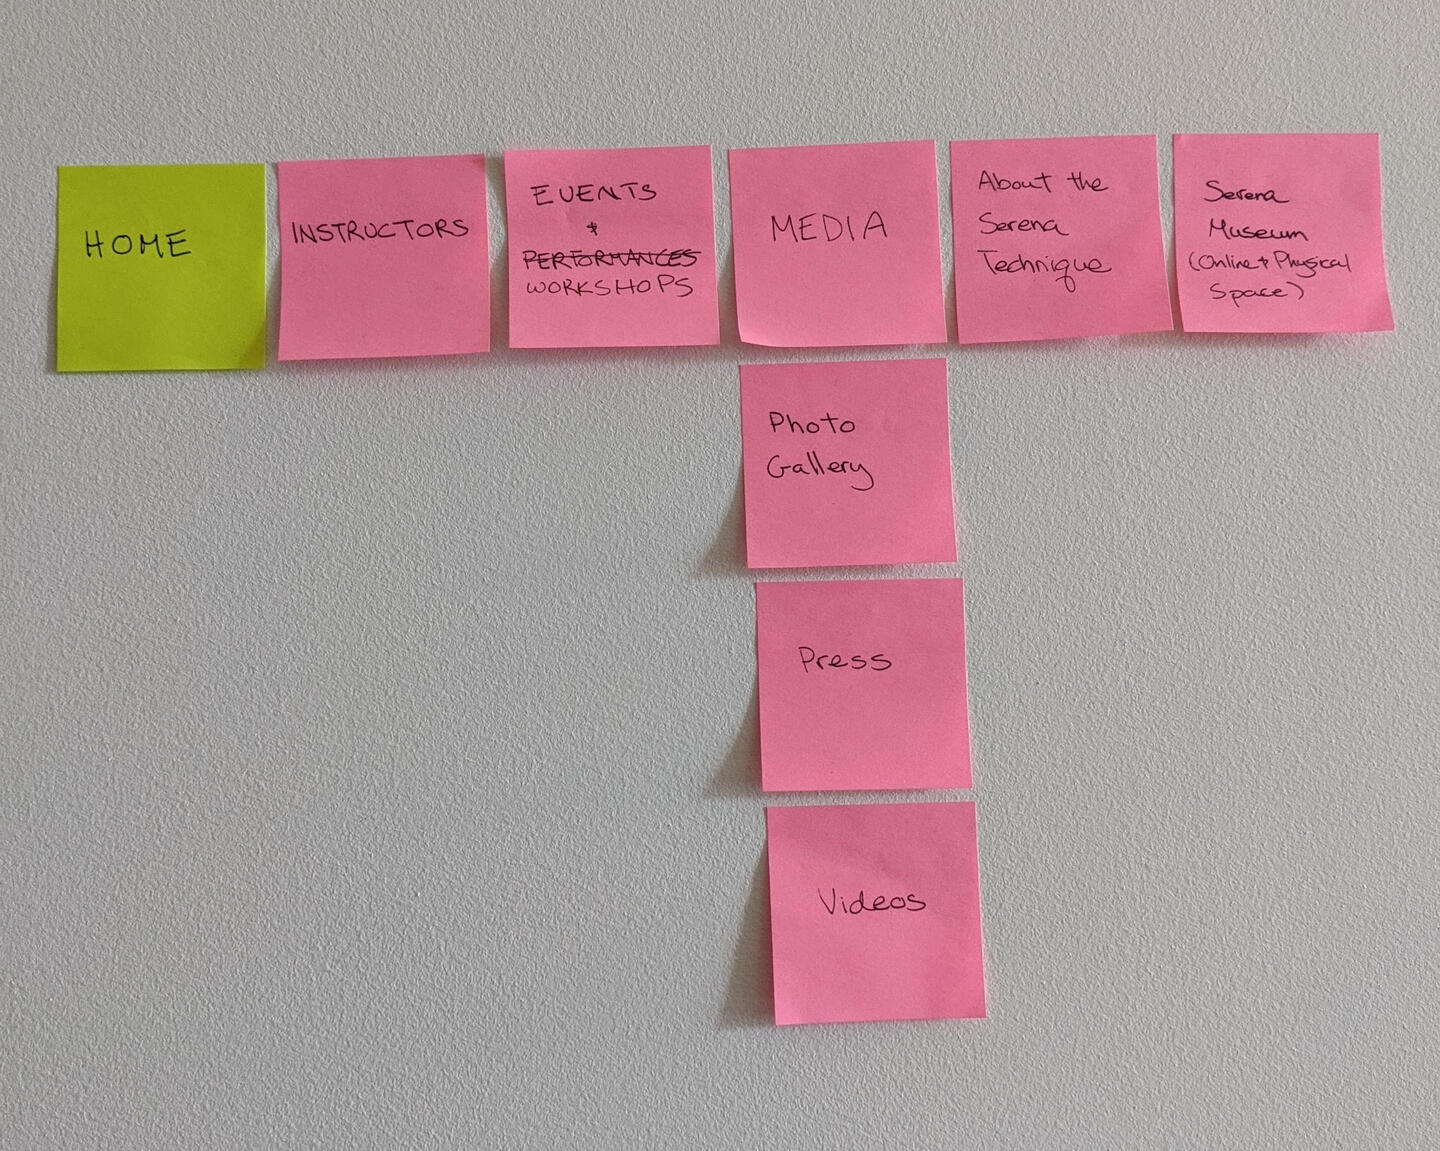 More post-its to condense the final setup of the navigation.